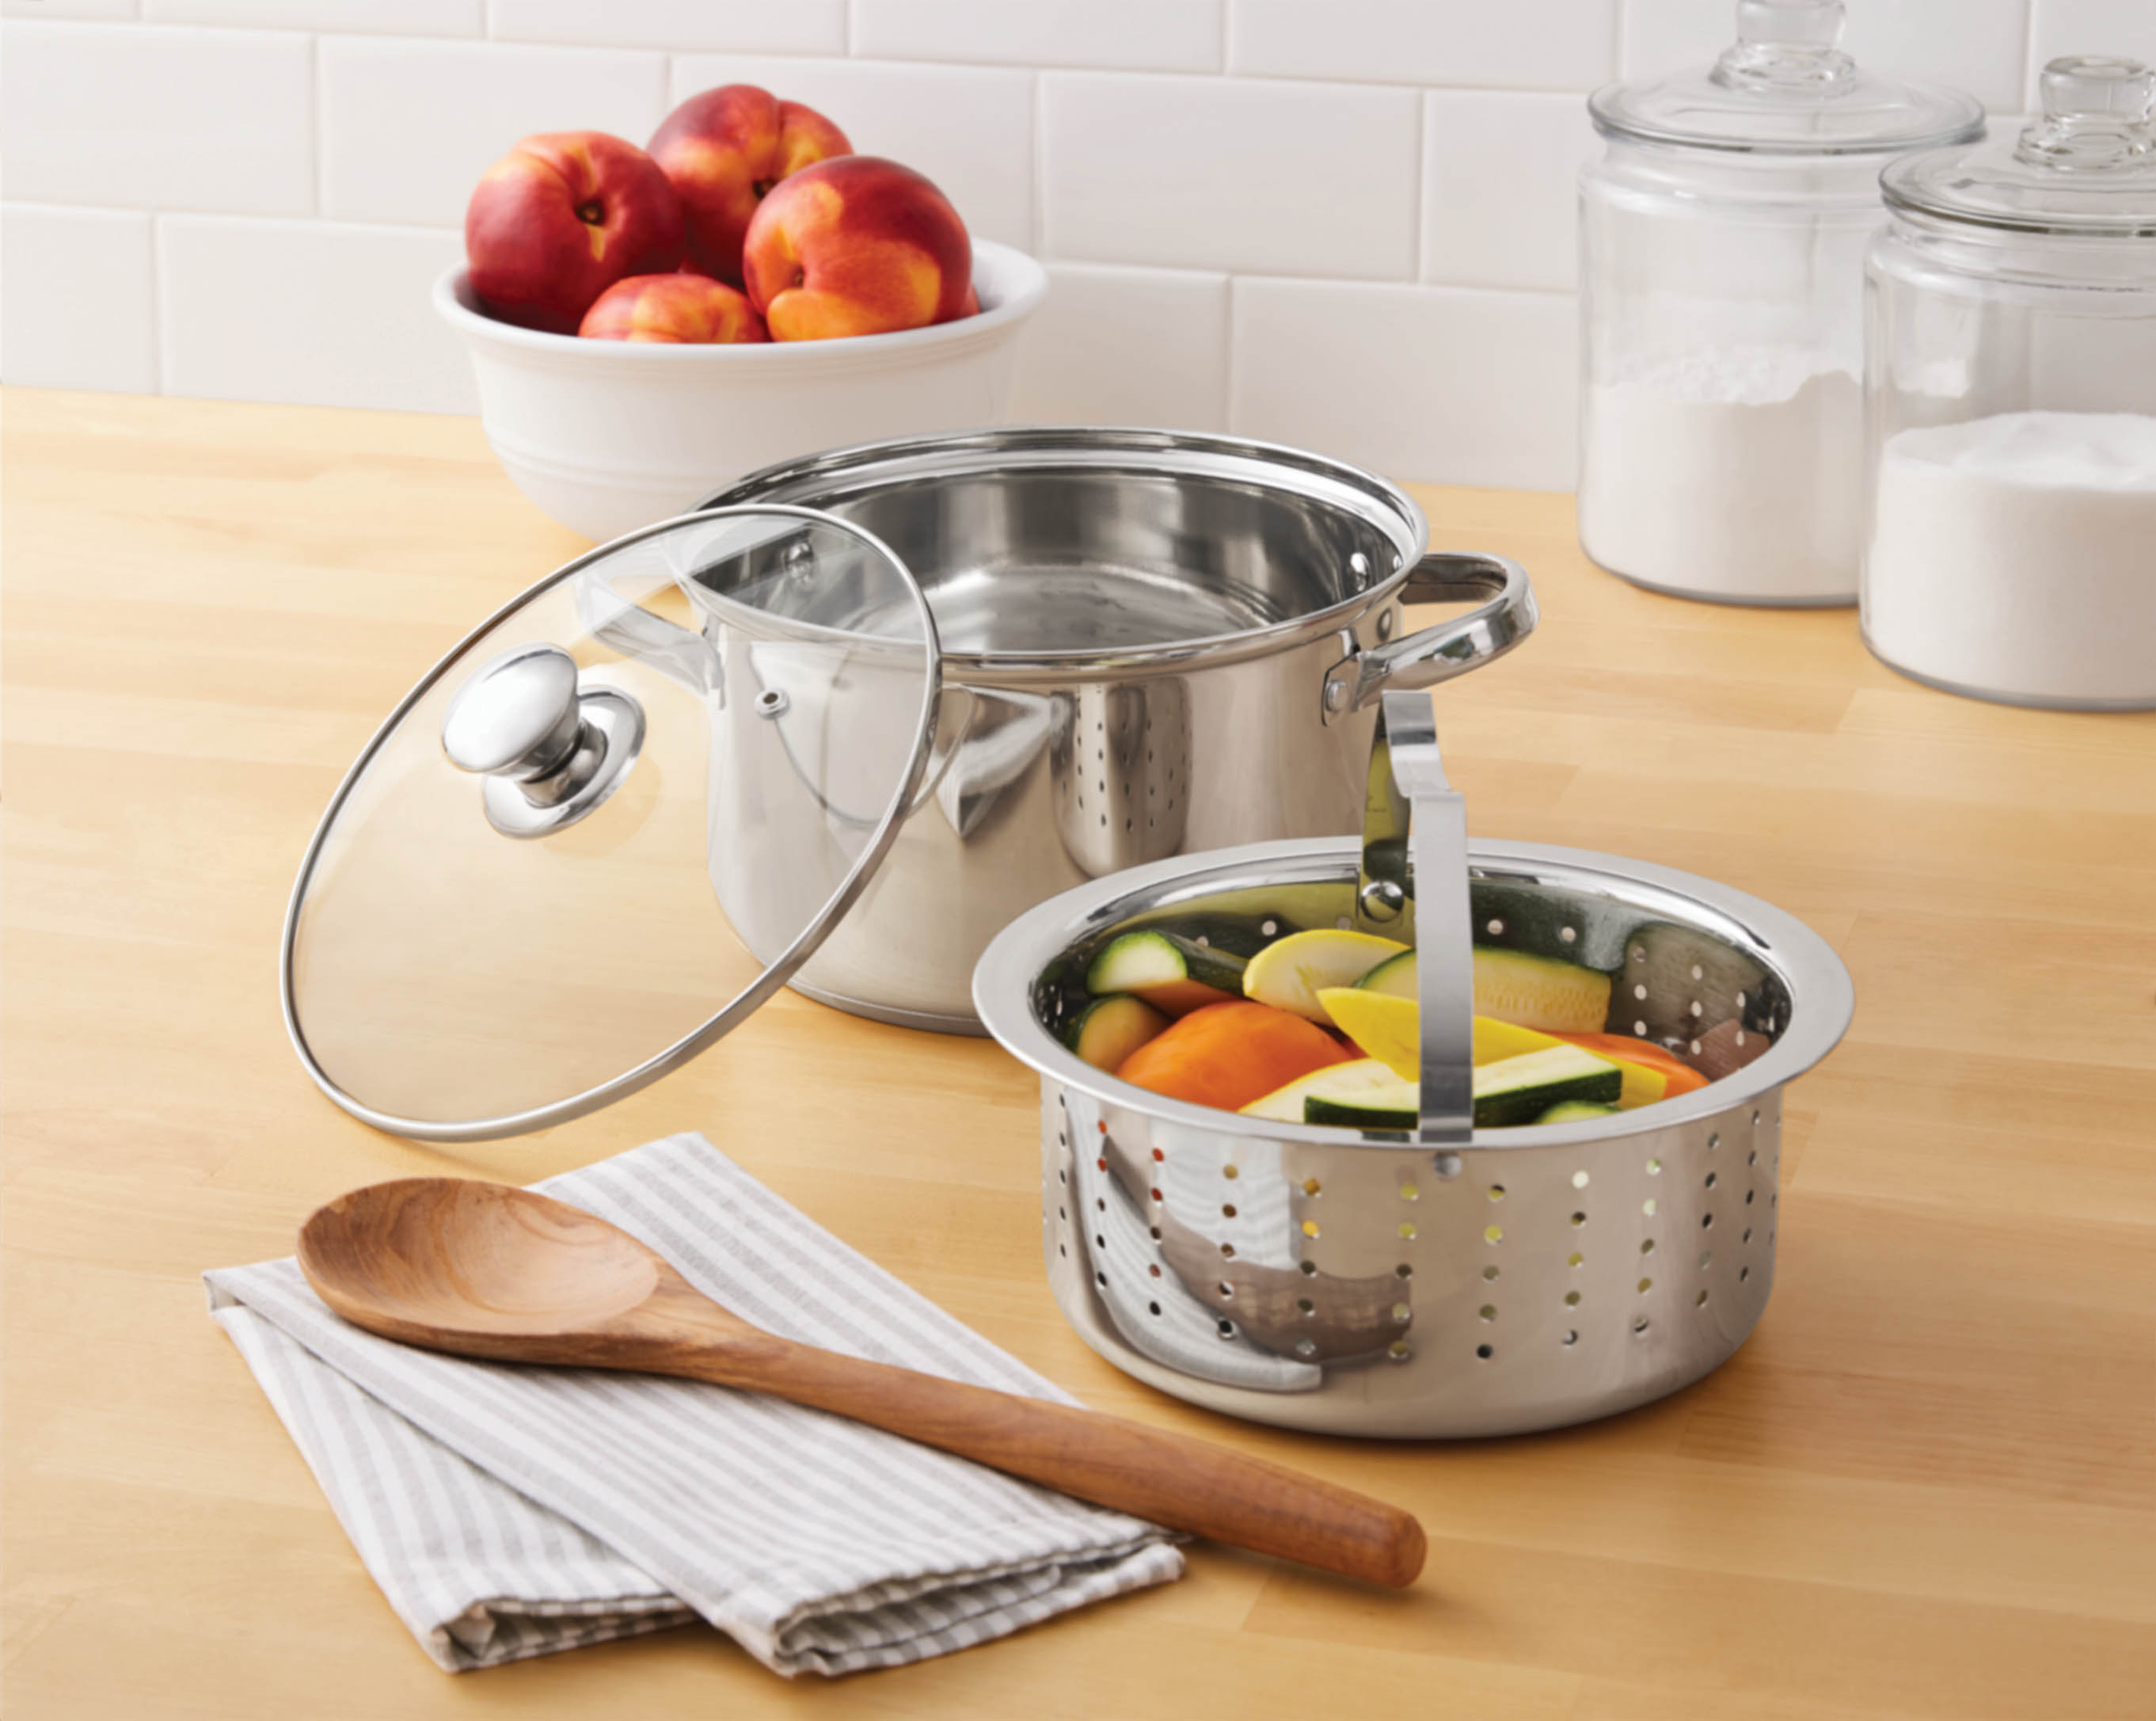 Mainstays Stainless Steel 4 Quart Steamer Pot with Steamer Insert and Lid - image 2 of 6